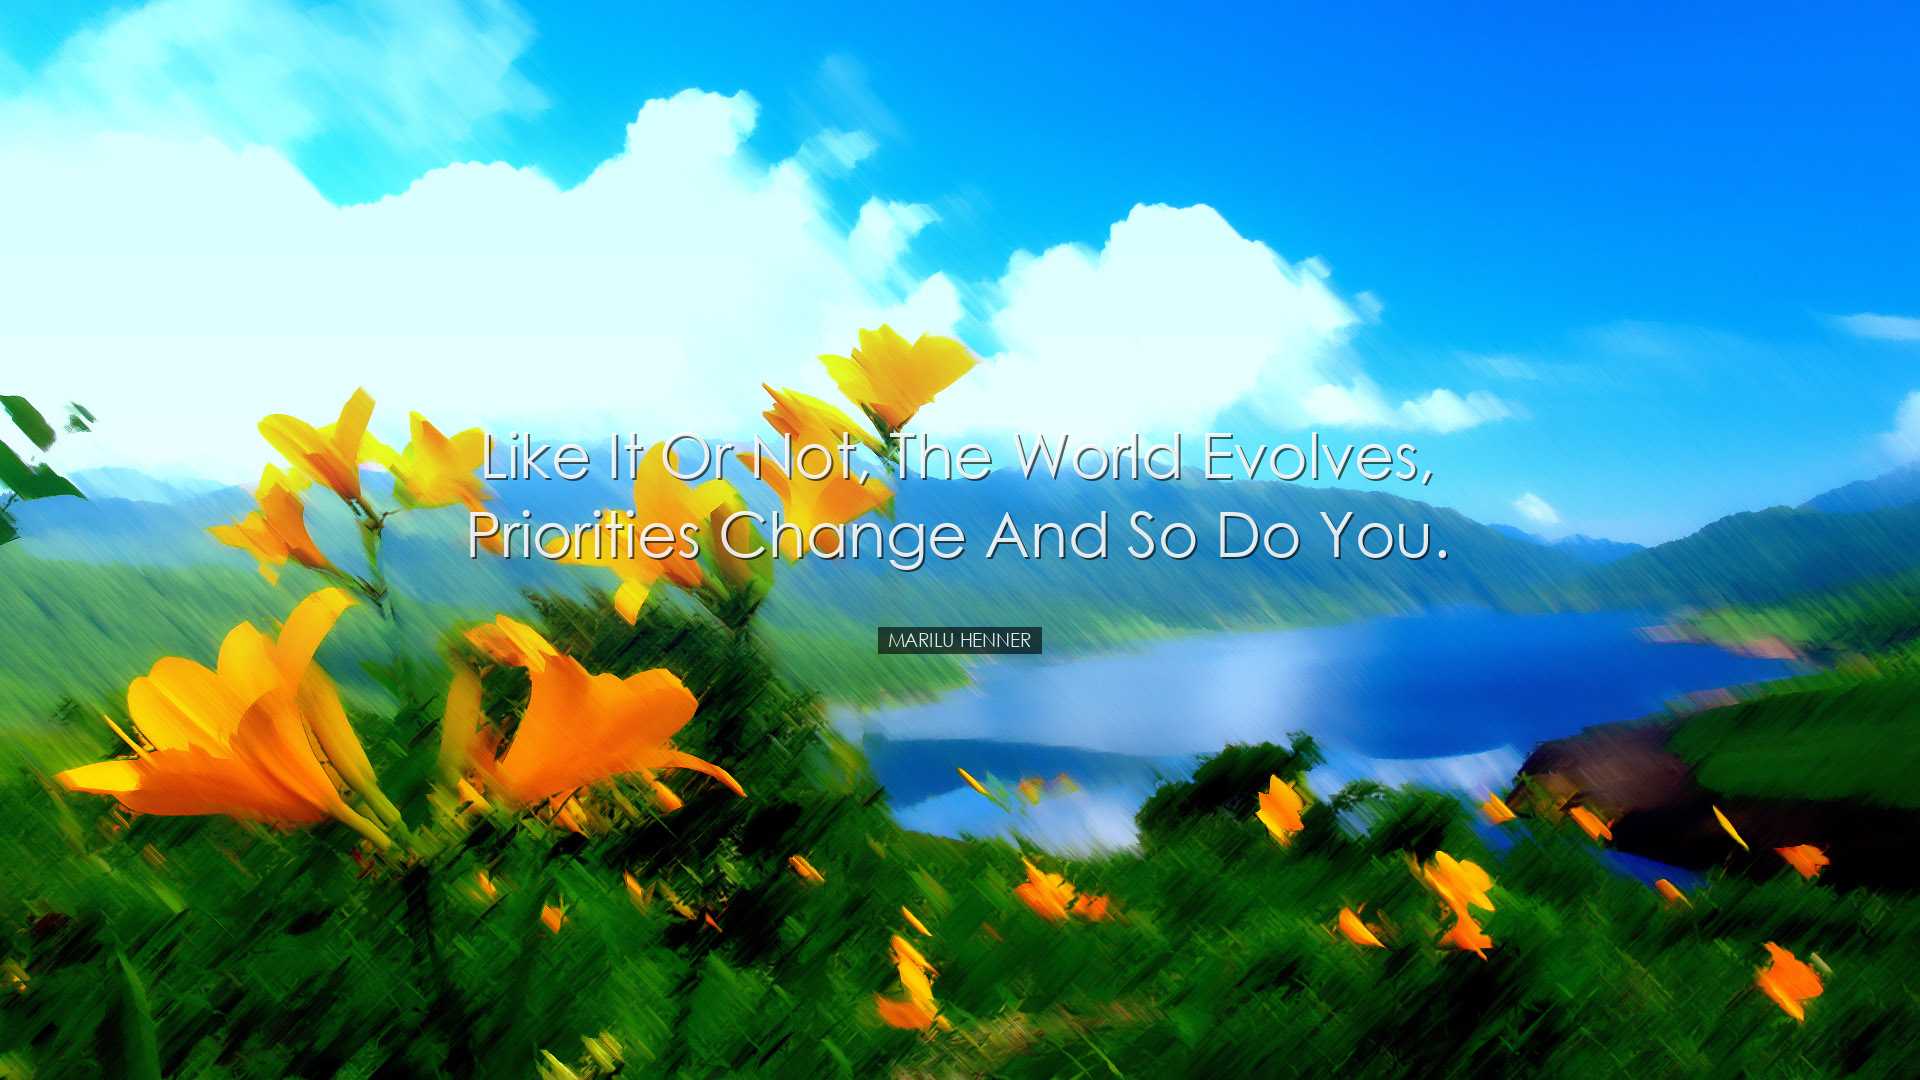 Like it or not, the world evolves, priorities change and so do you